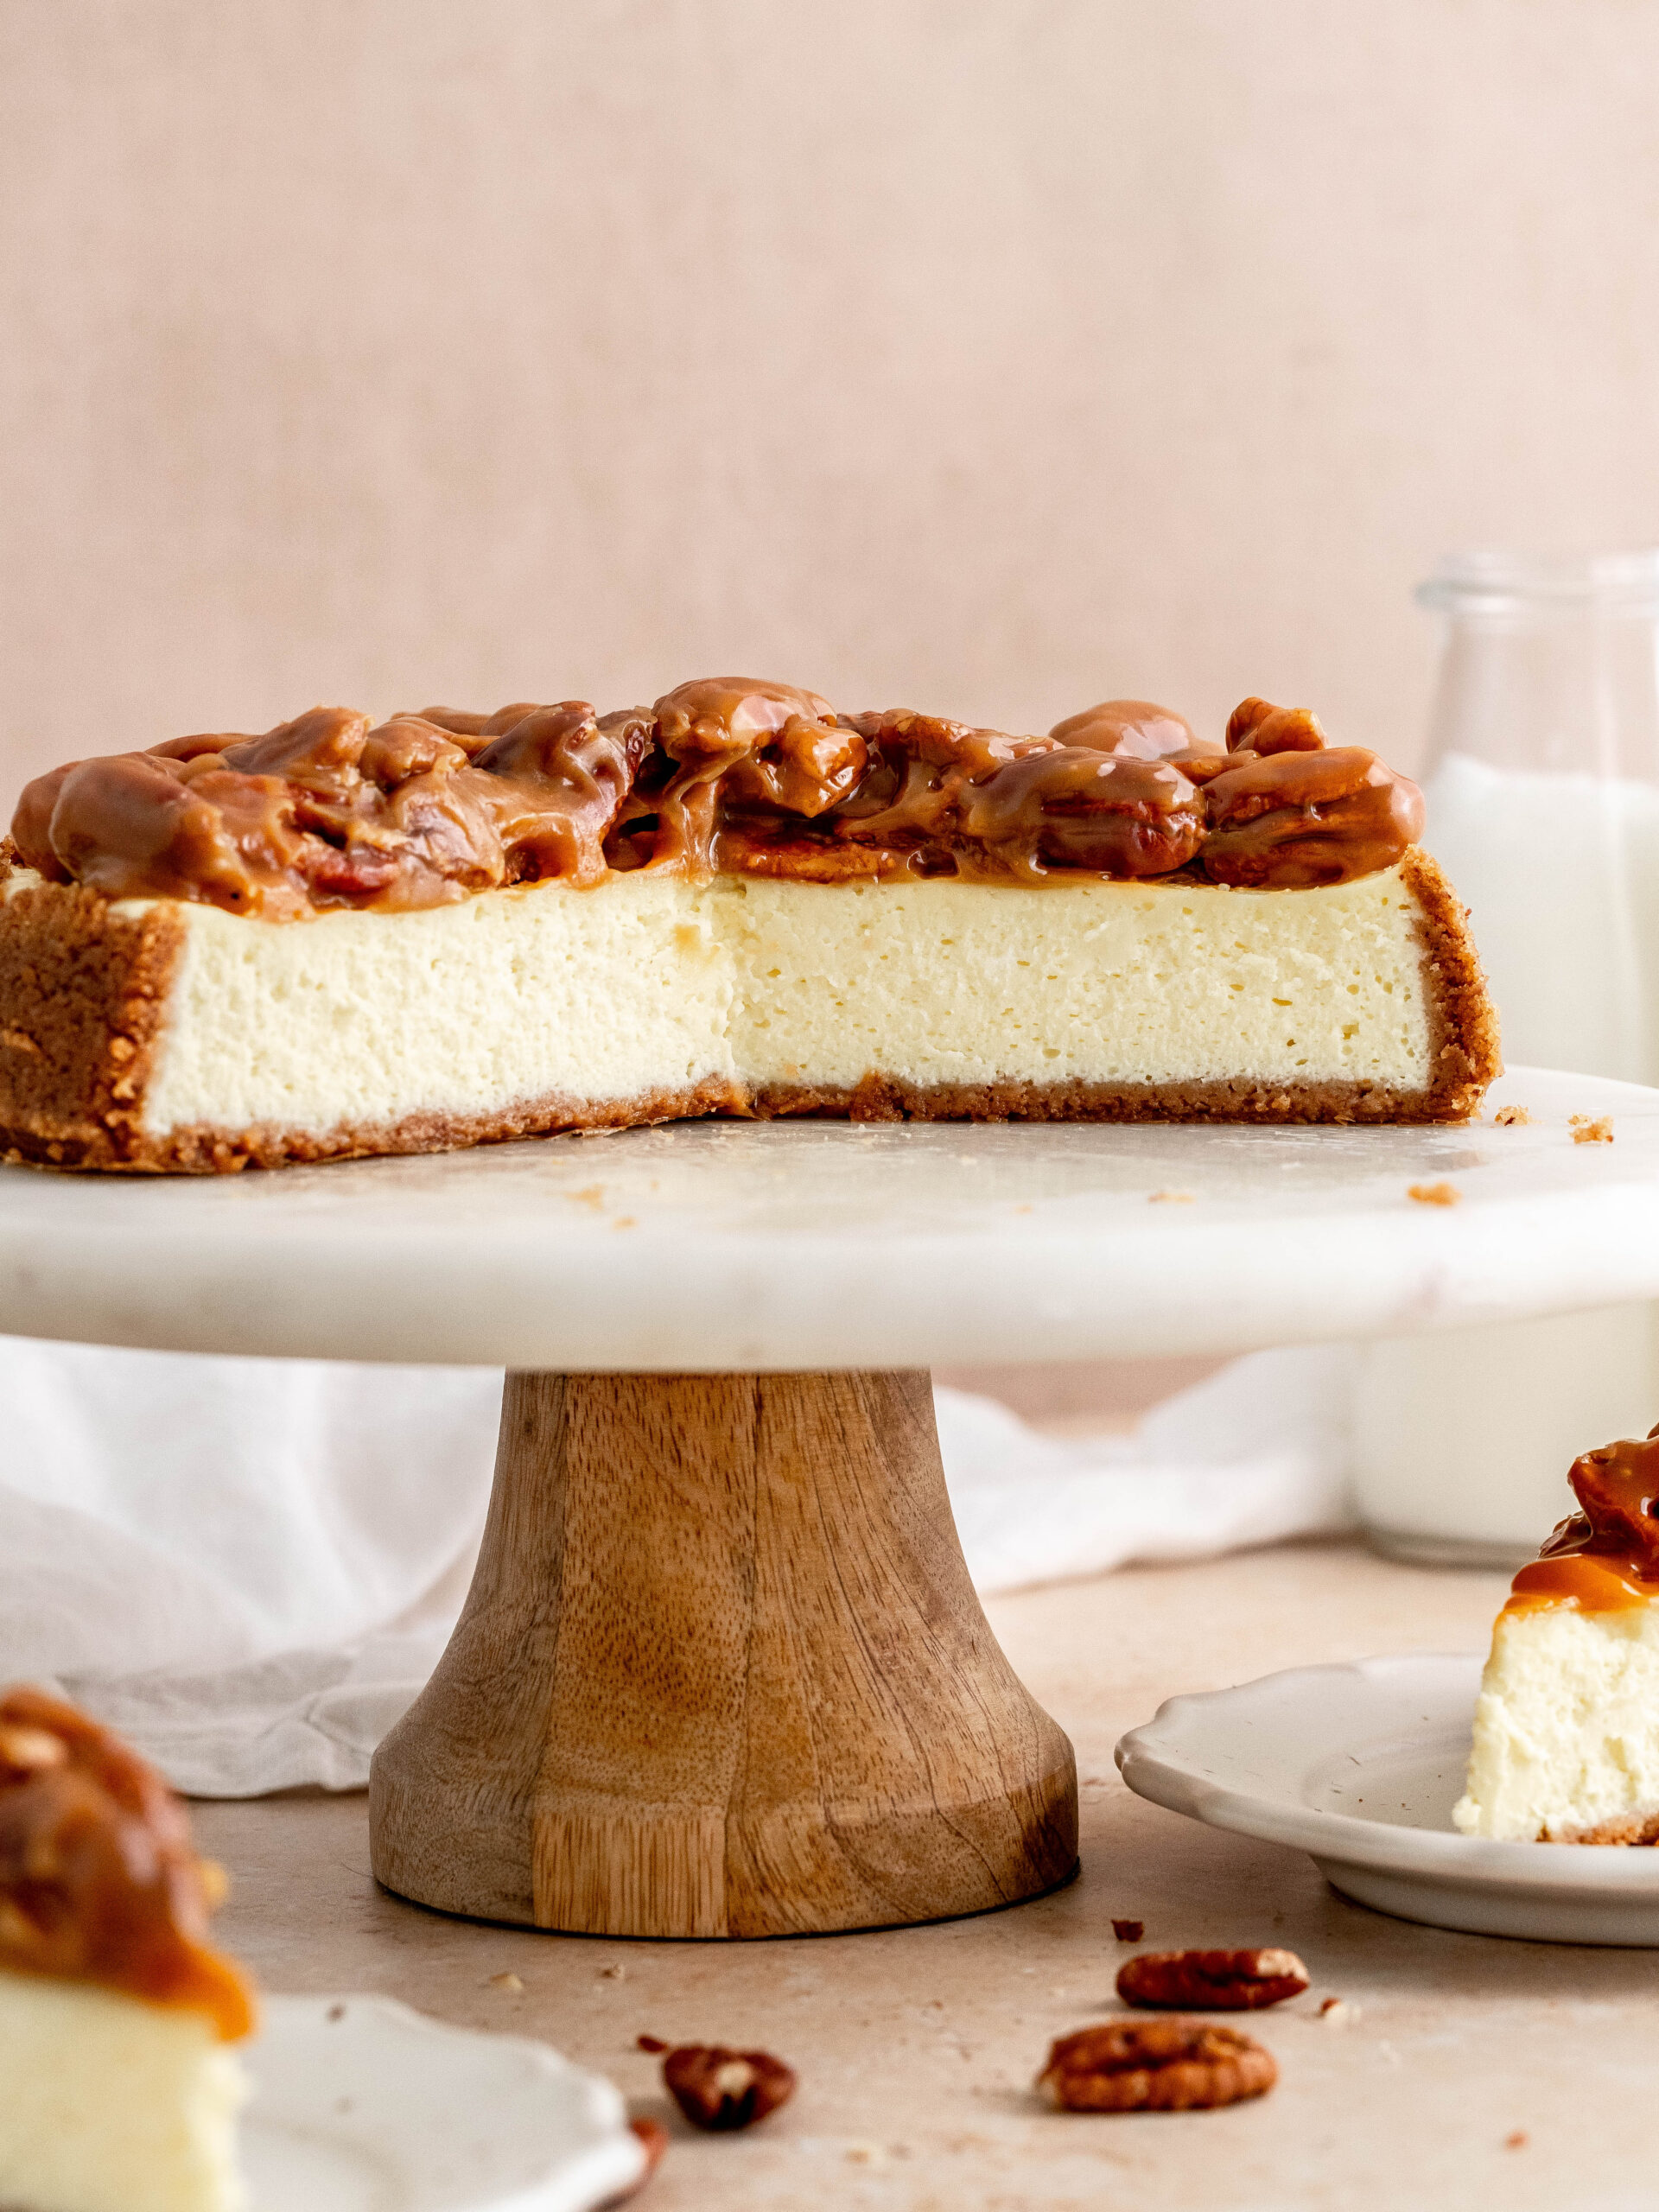 Caramel pecan cheesecake on a cake stand